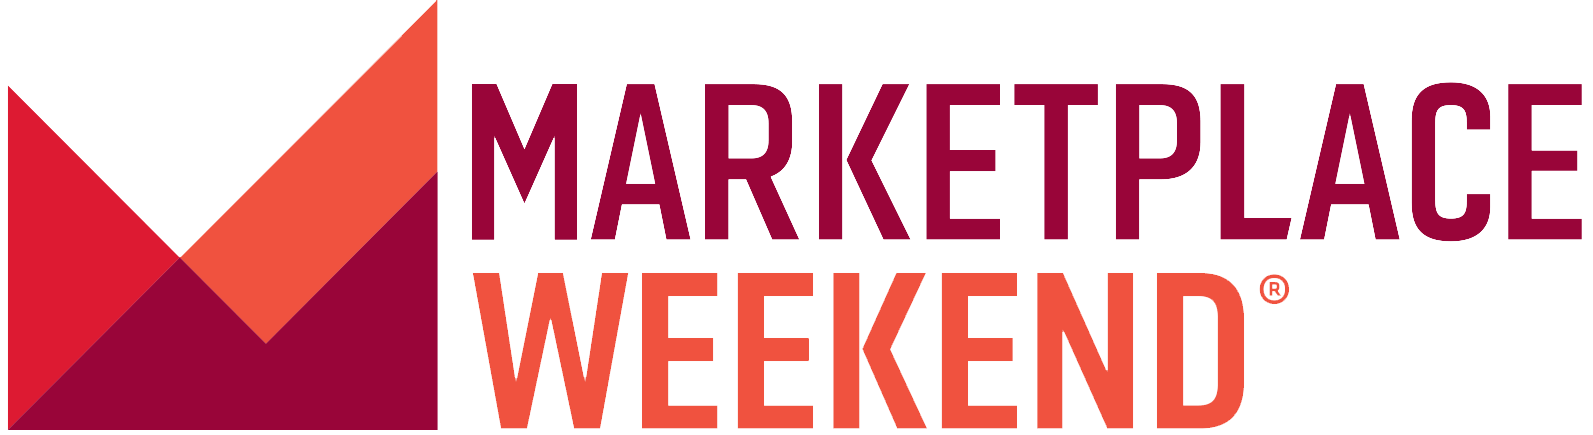 Marketplace Weekend for Friday, December 9, 2016